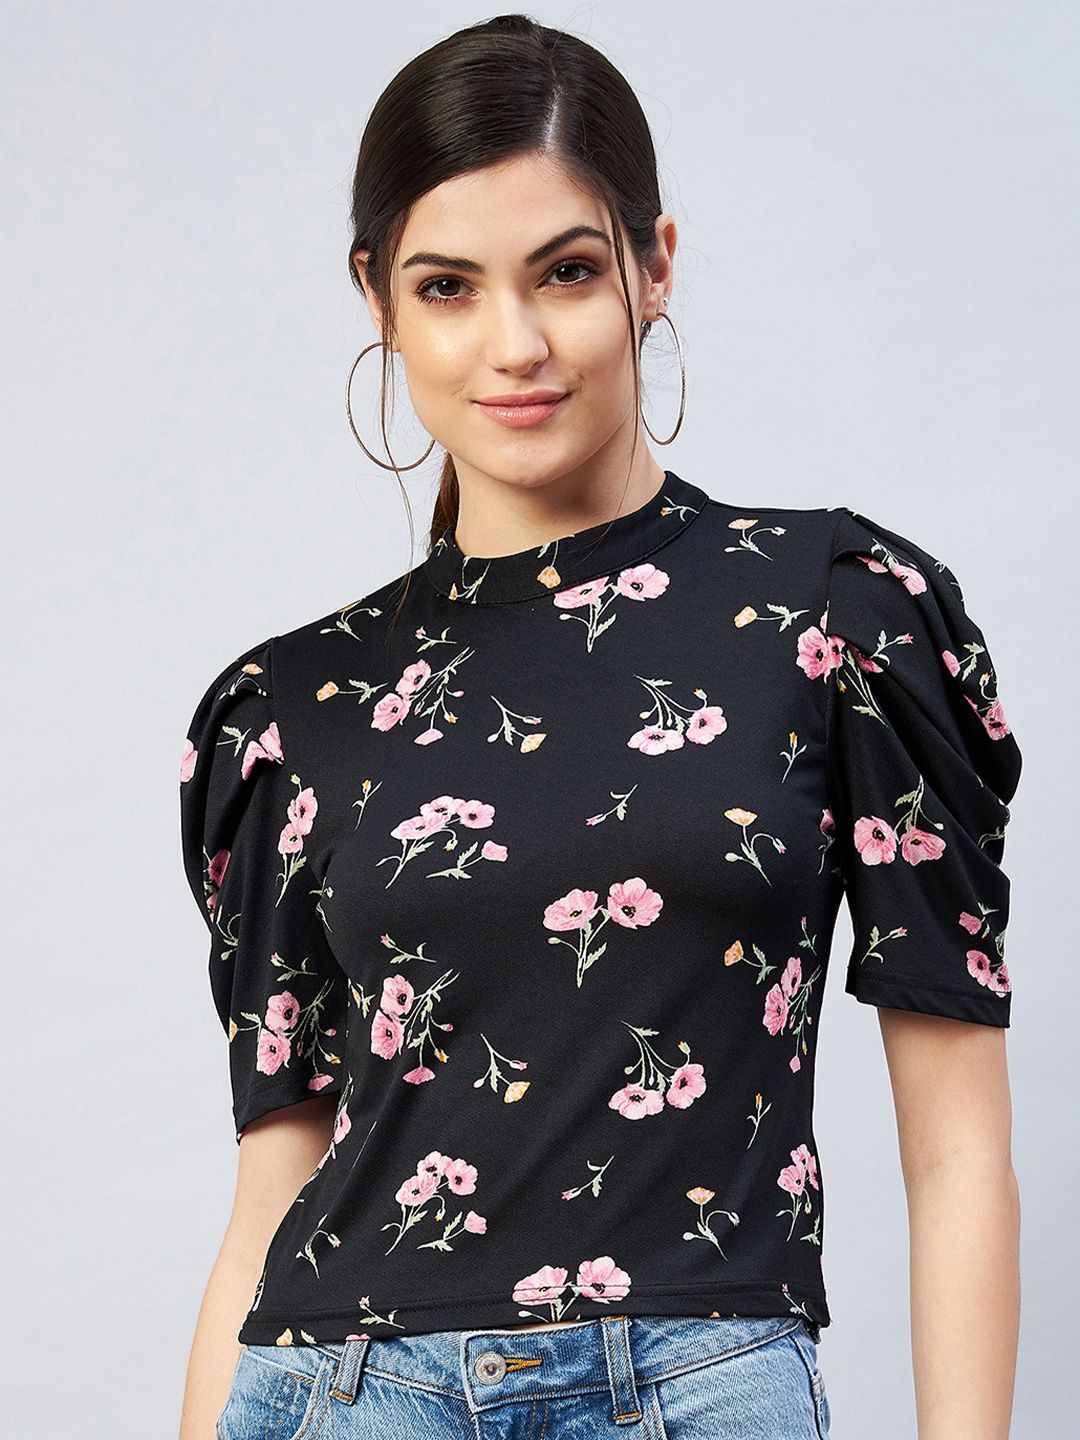 Marie Claire Black & Pink Floral Printed Styled Back Top Price in India